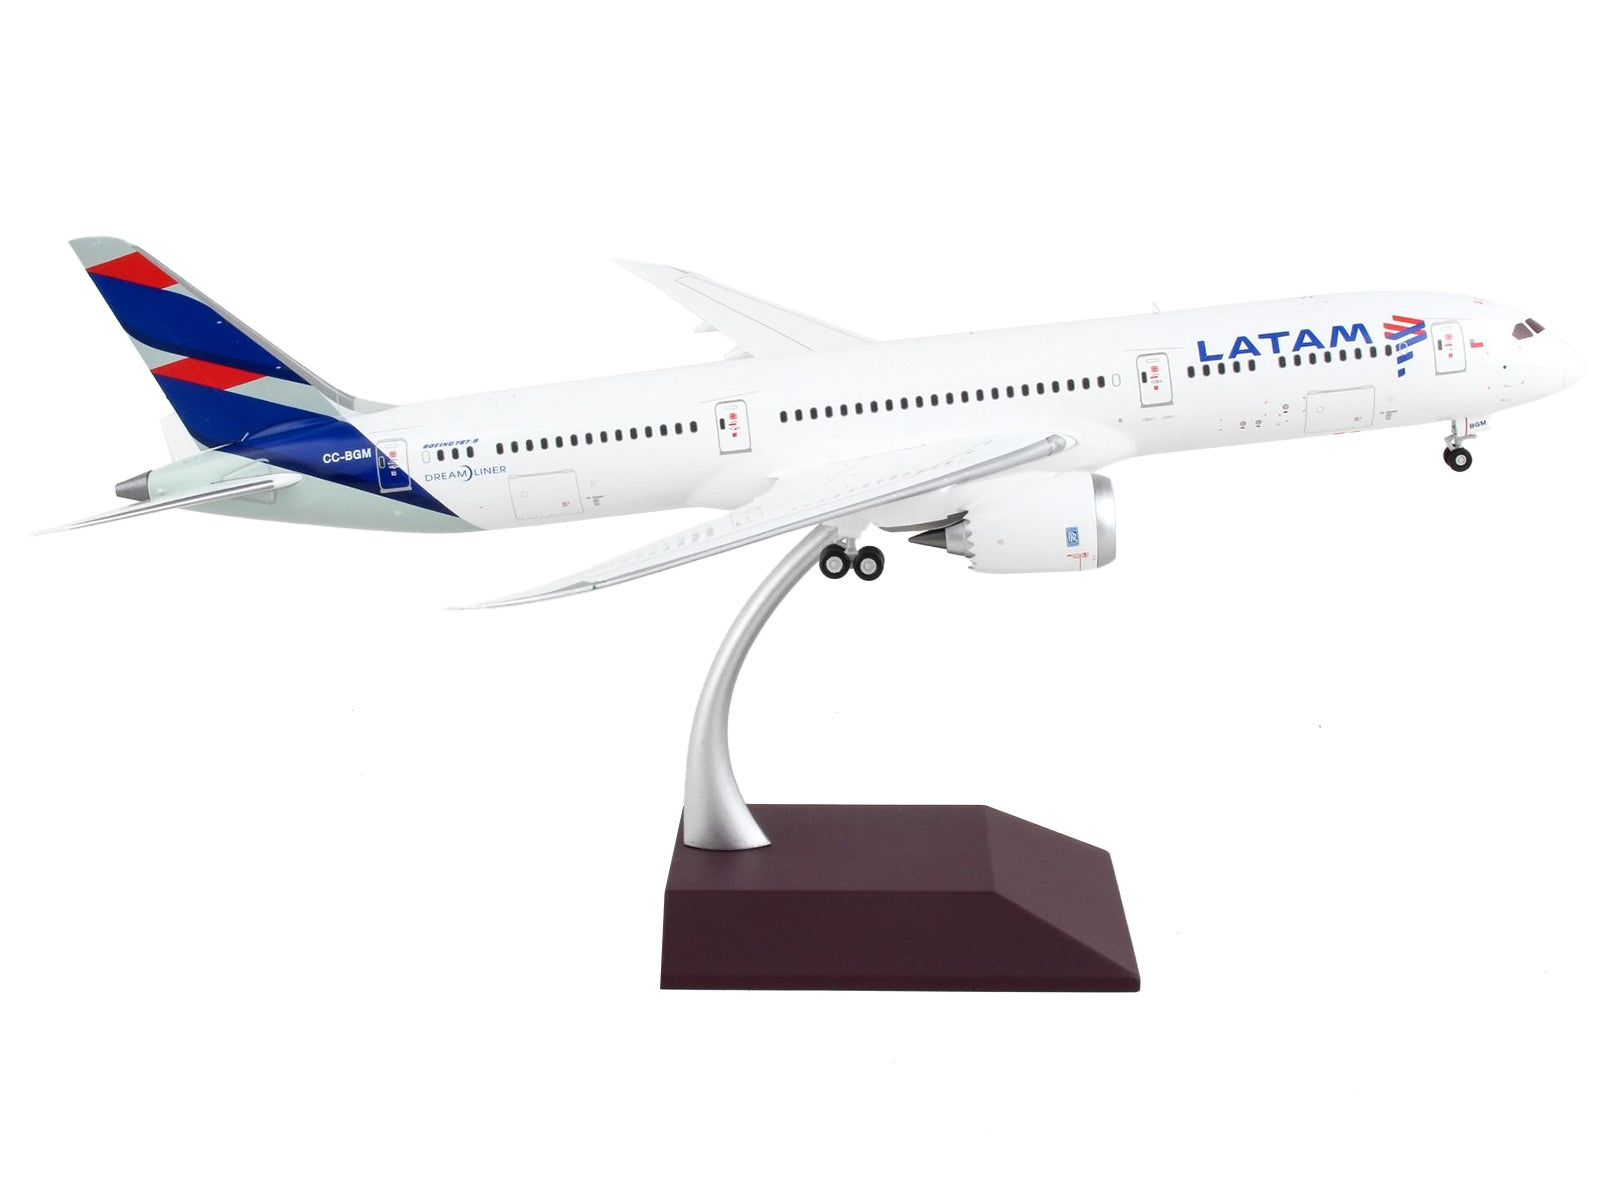 Boeing 787-9 Commercial Aircraft "LATAM Airlines" White with Blue Tail "Gemini 200" Series 1/200 Diecast Model Airplane by GeminiJets